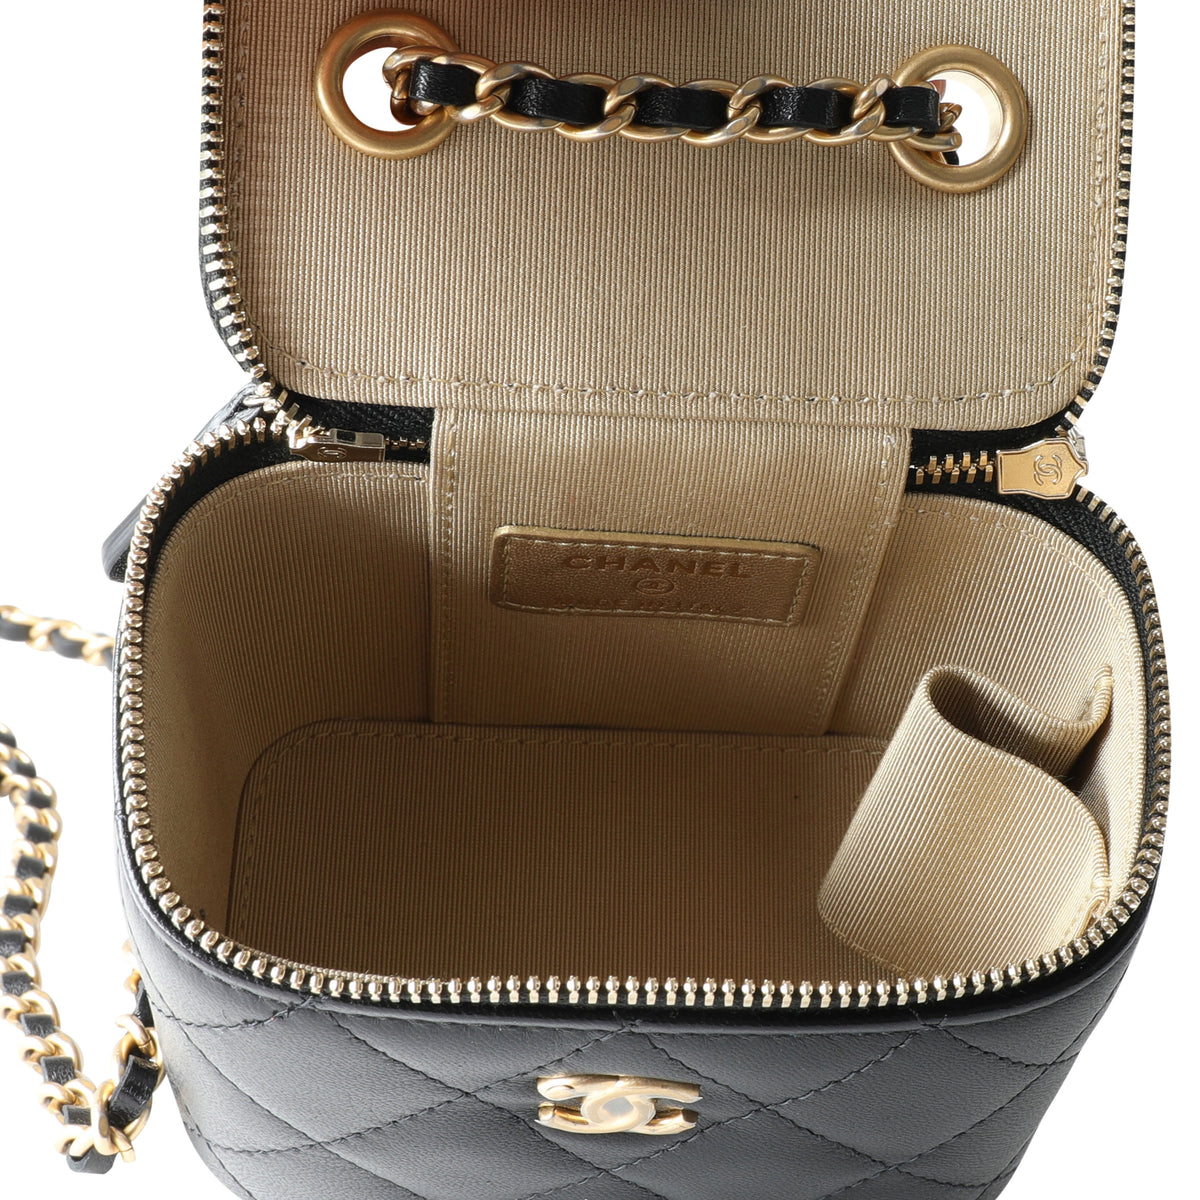 CHANEL Exterior Bags & Handbags for Women, Authenticity Guaranteed